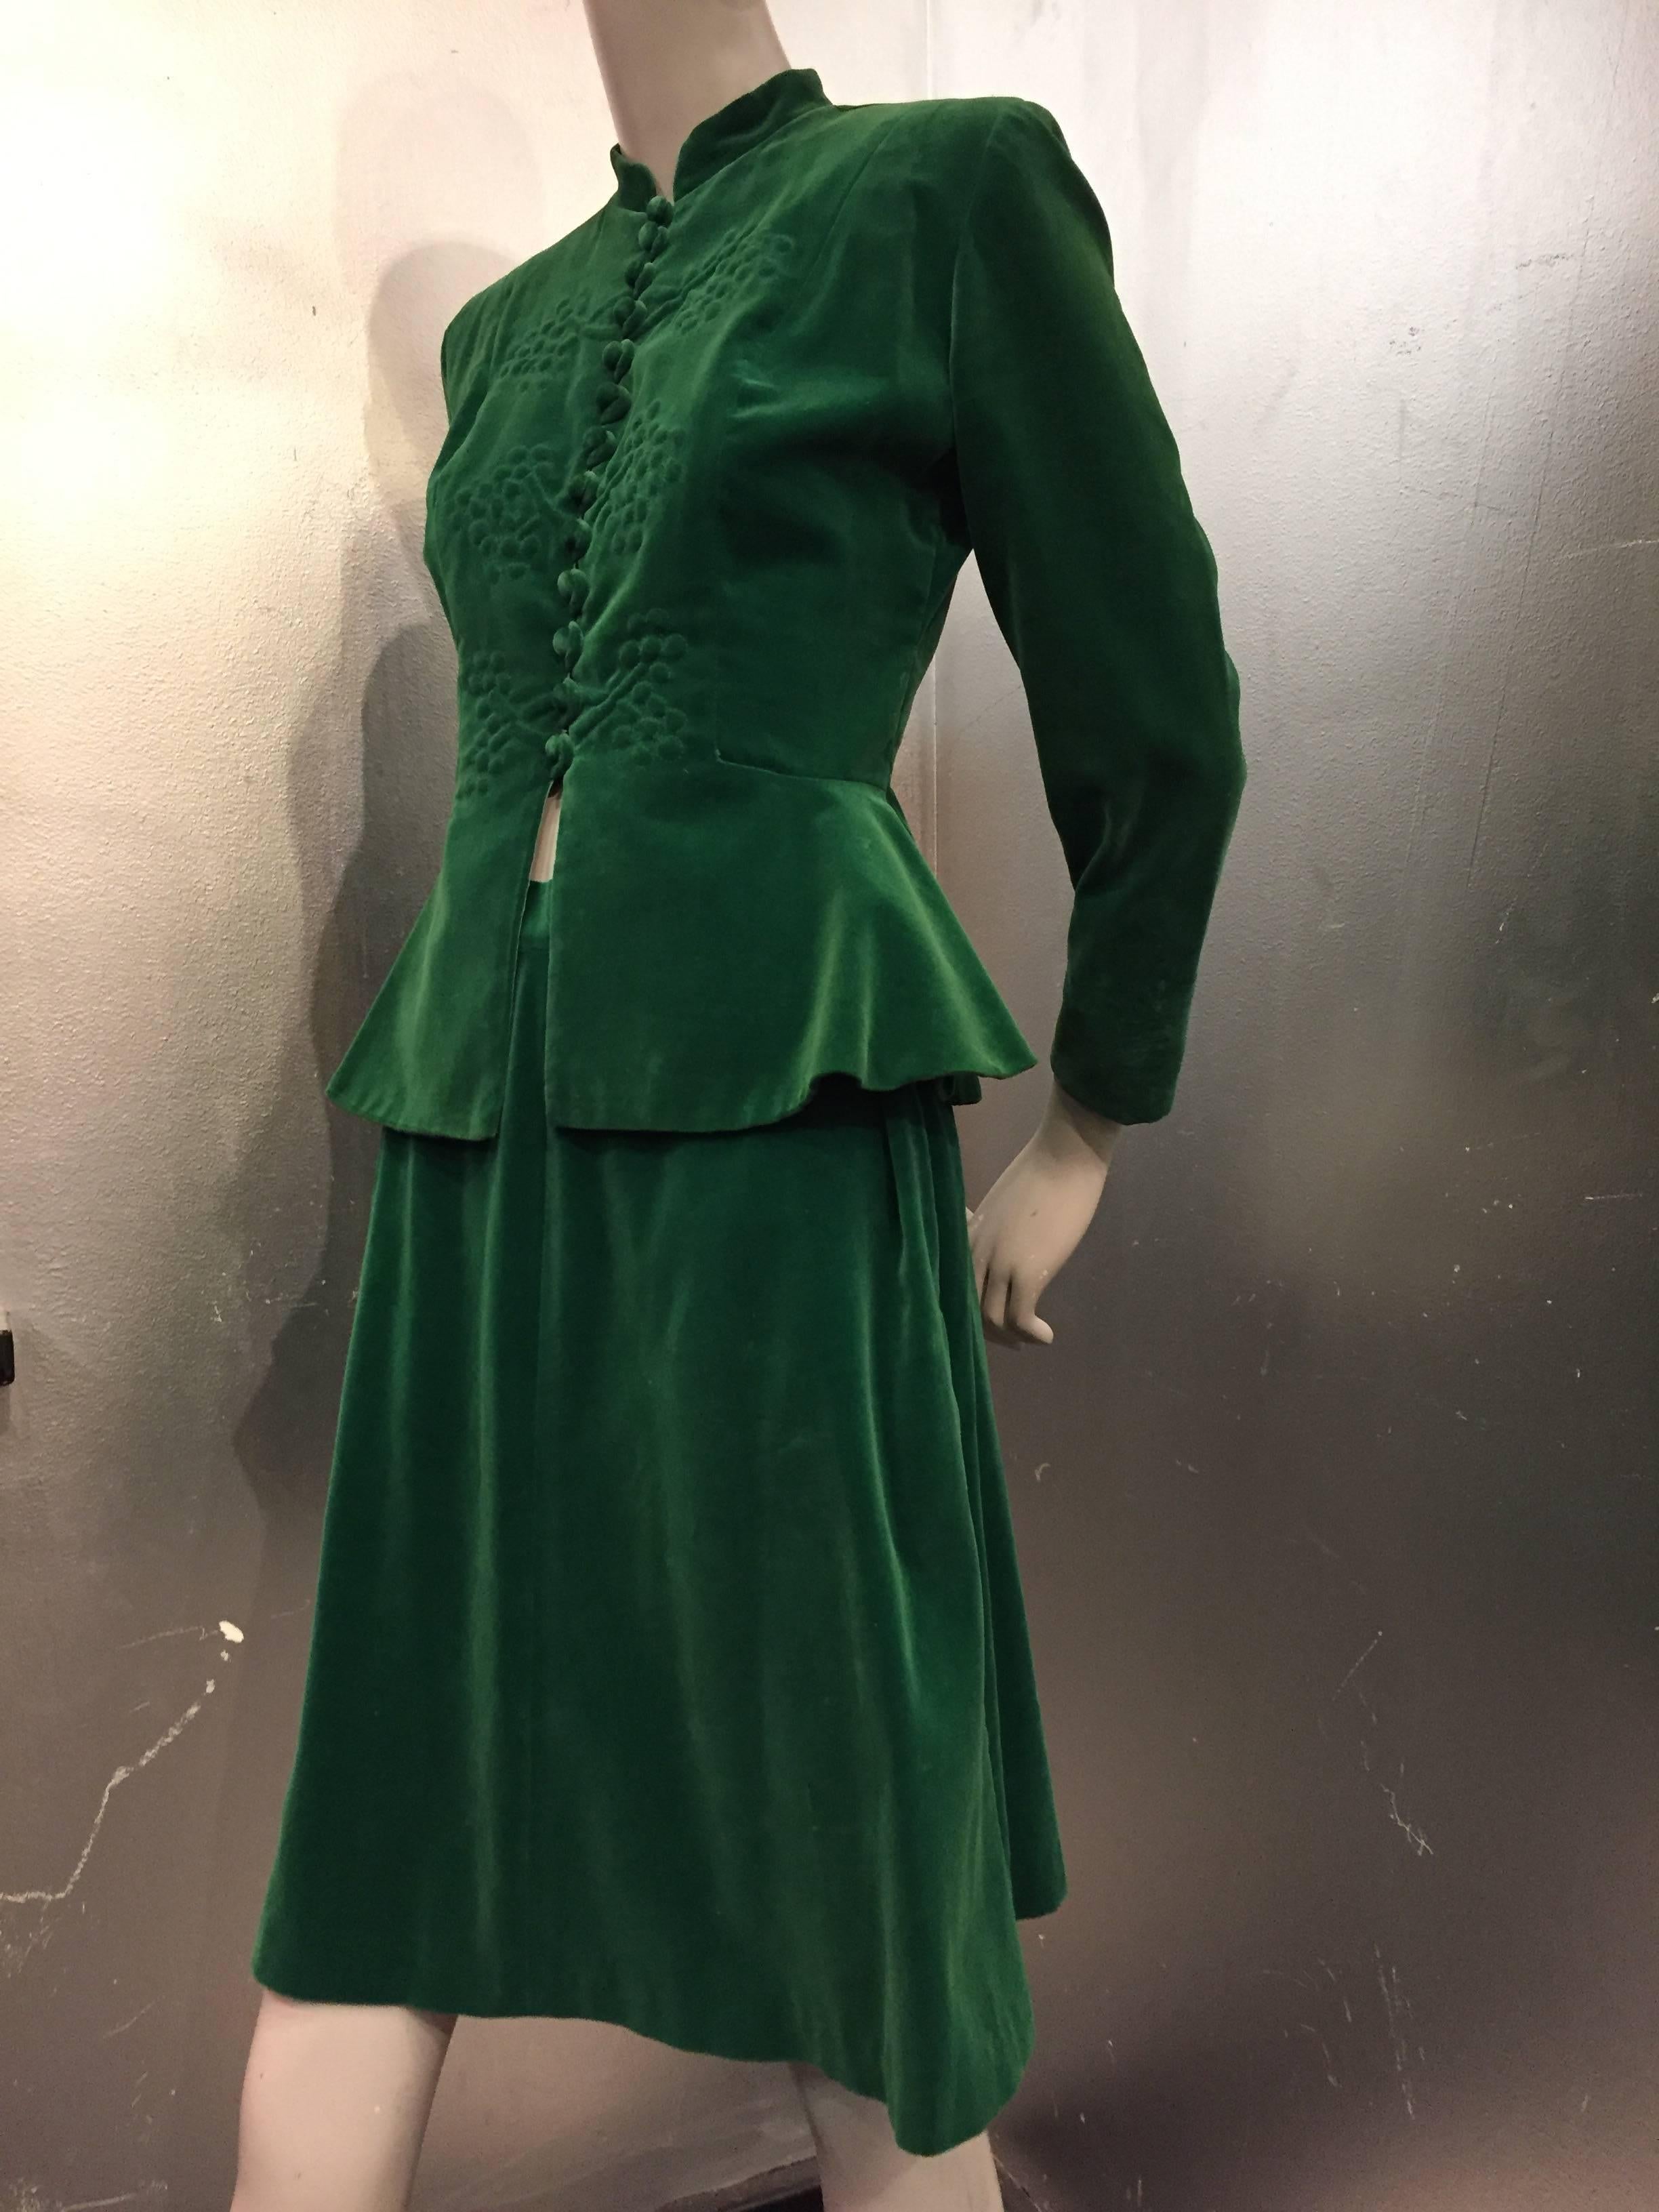 A beautiful and smart 1940s emerald green lightweight supple velvet skirt suit:  Covered buttons and loops down the entire front with beautiful floral trapunto stitch work.  Peplum, Nehru-style collar and tapered sleeves.  Skirt is flared with